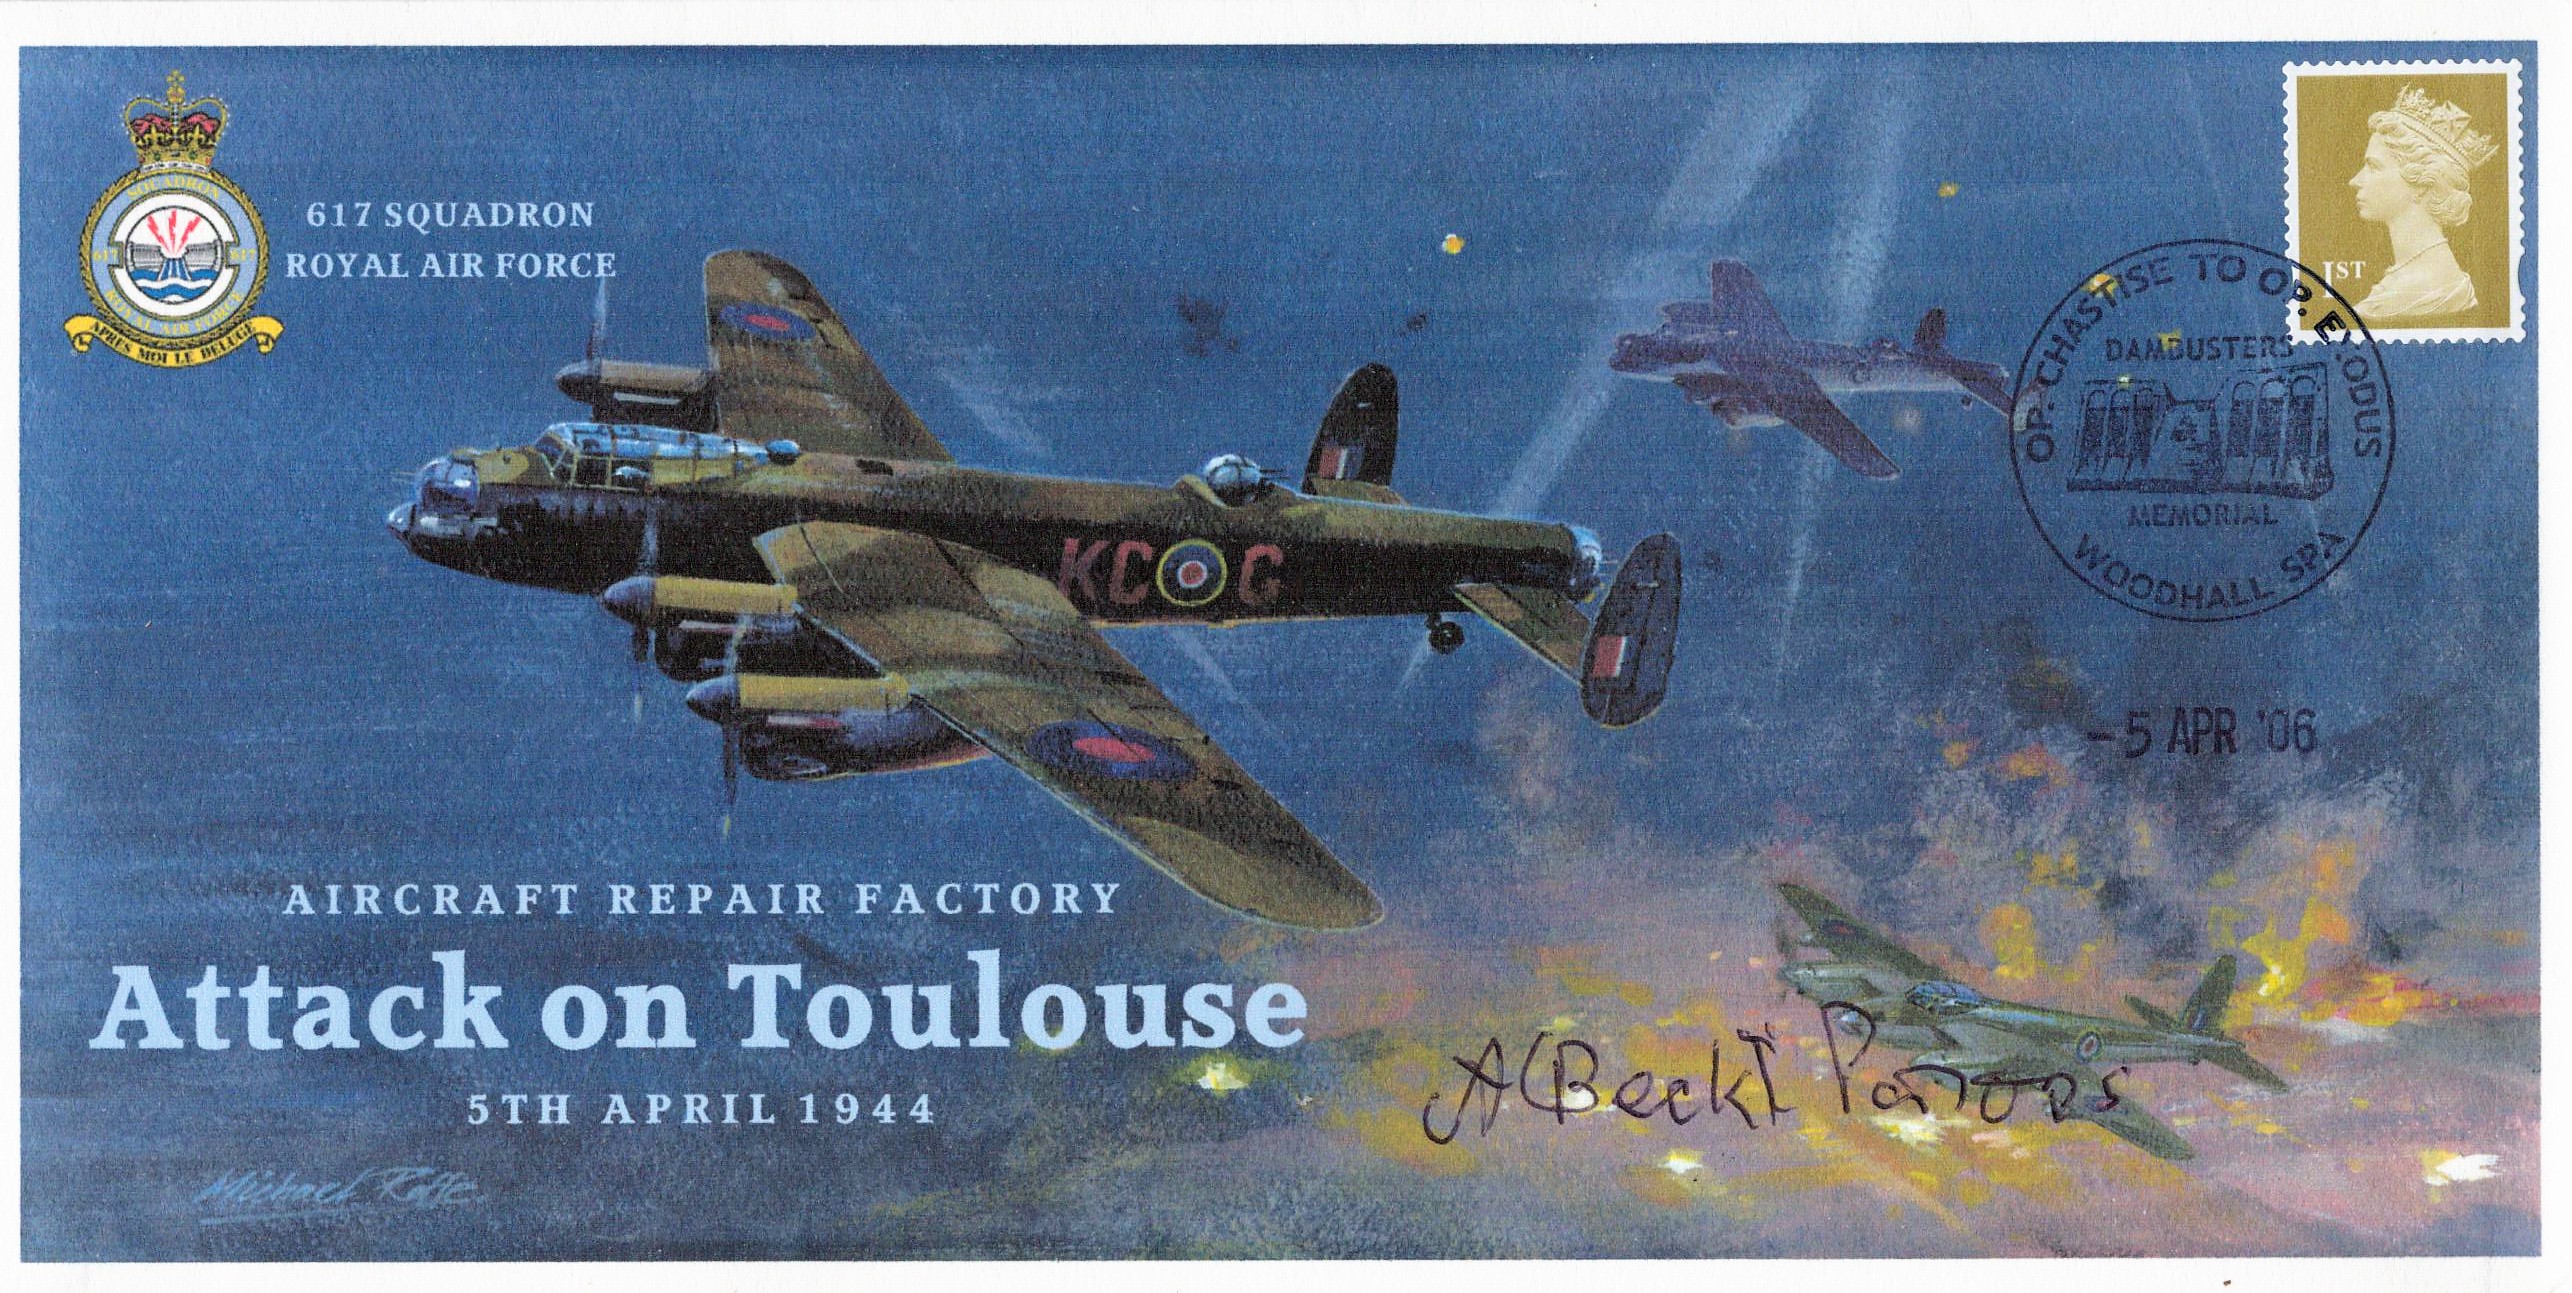 WW2 Dambuster Sqn A Beck Parsons signed Unflown FDC 617 Squadron RAF Attack on Toulouse Aircraft